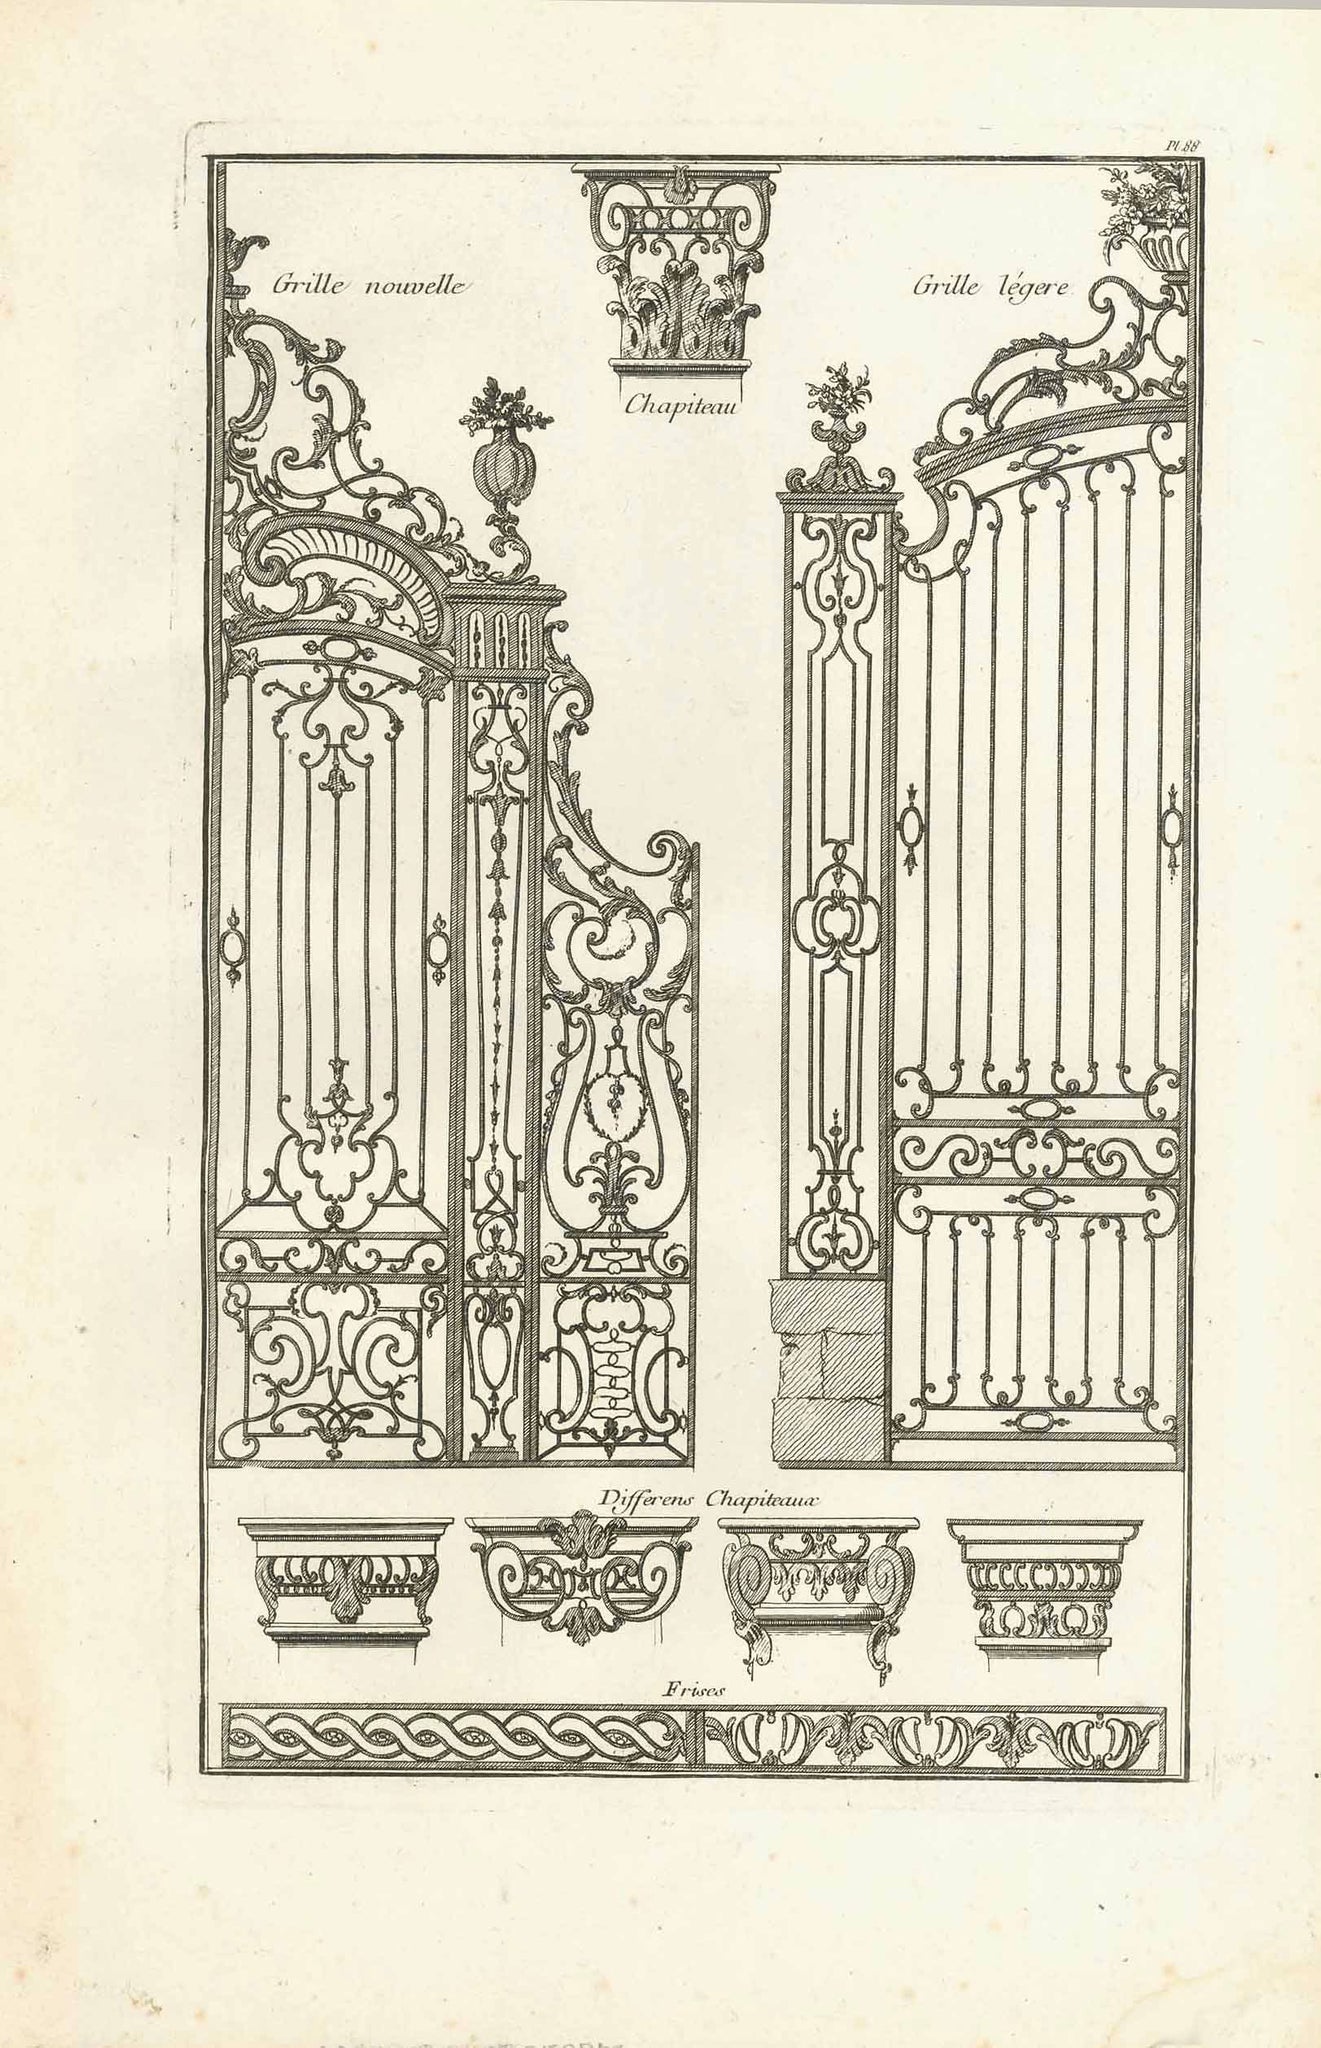 No title. Wrought Iron Gates - Capitals  Copper etching  Published in "Traite elementary pratique d'architecture ou étude des cinq ordres"  - Regula delle cinque ordini d'architettura  By Barozzi da Vignola (1507-1573)  Original Italian edition was printed in 1562. Our prints are from the French edition. Paris, 1767  Page 88 from this work.  Original antique print 